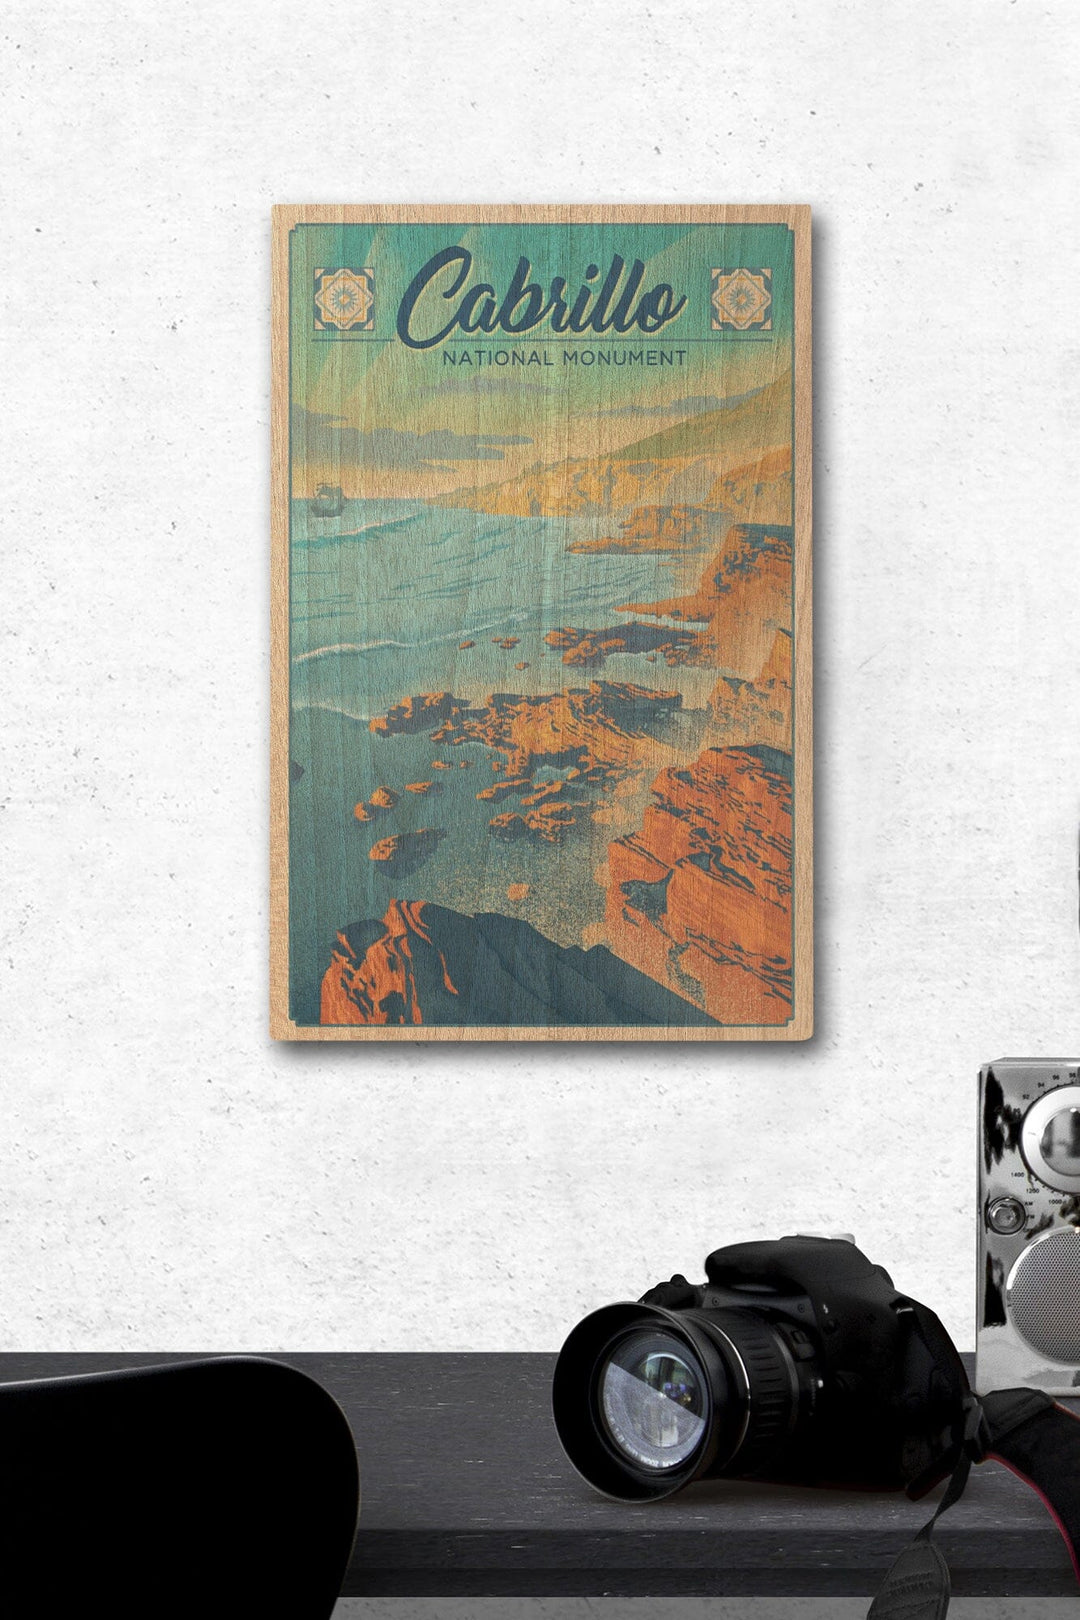 Cabrillo National Monument, California, Lithograph, Lantern Press Artwork, Wood Signs and Postcards Wood Lantern Press 12 x 18 Wood Gallery Print 